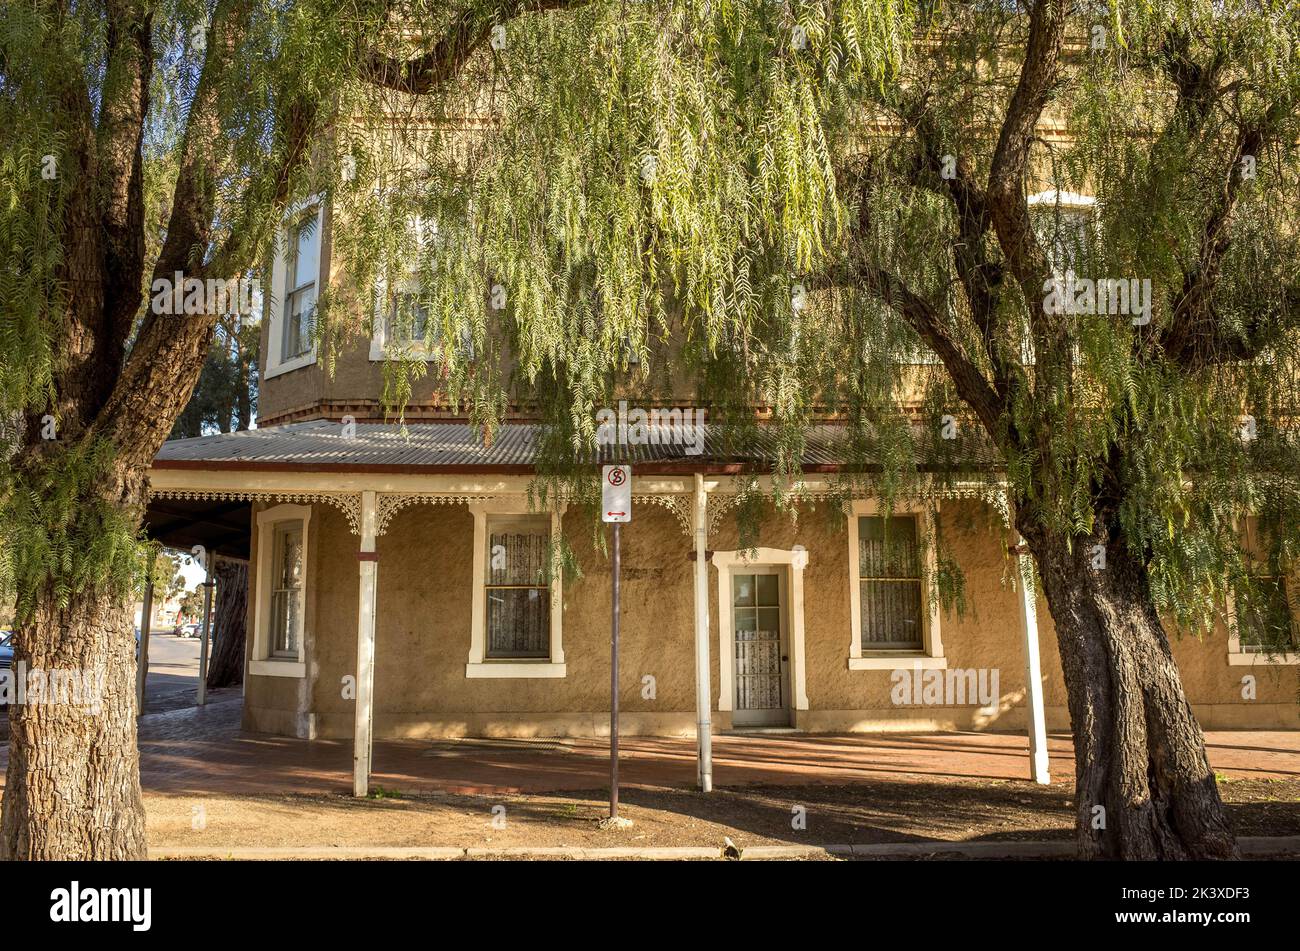 The historic building of the Steampacket Hotel, Echuca, Australia. Originally built in early 1870, the hotel has close proximity to the wharf. Stock Photo